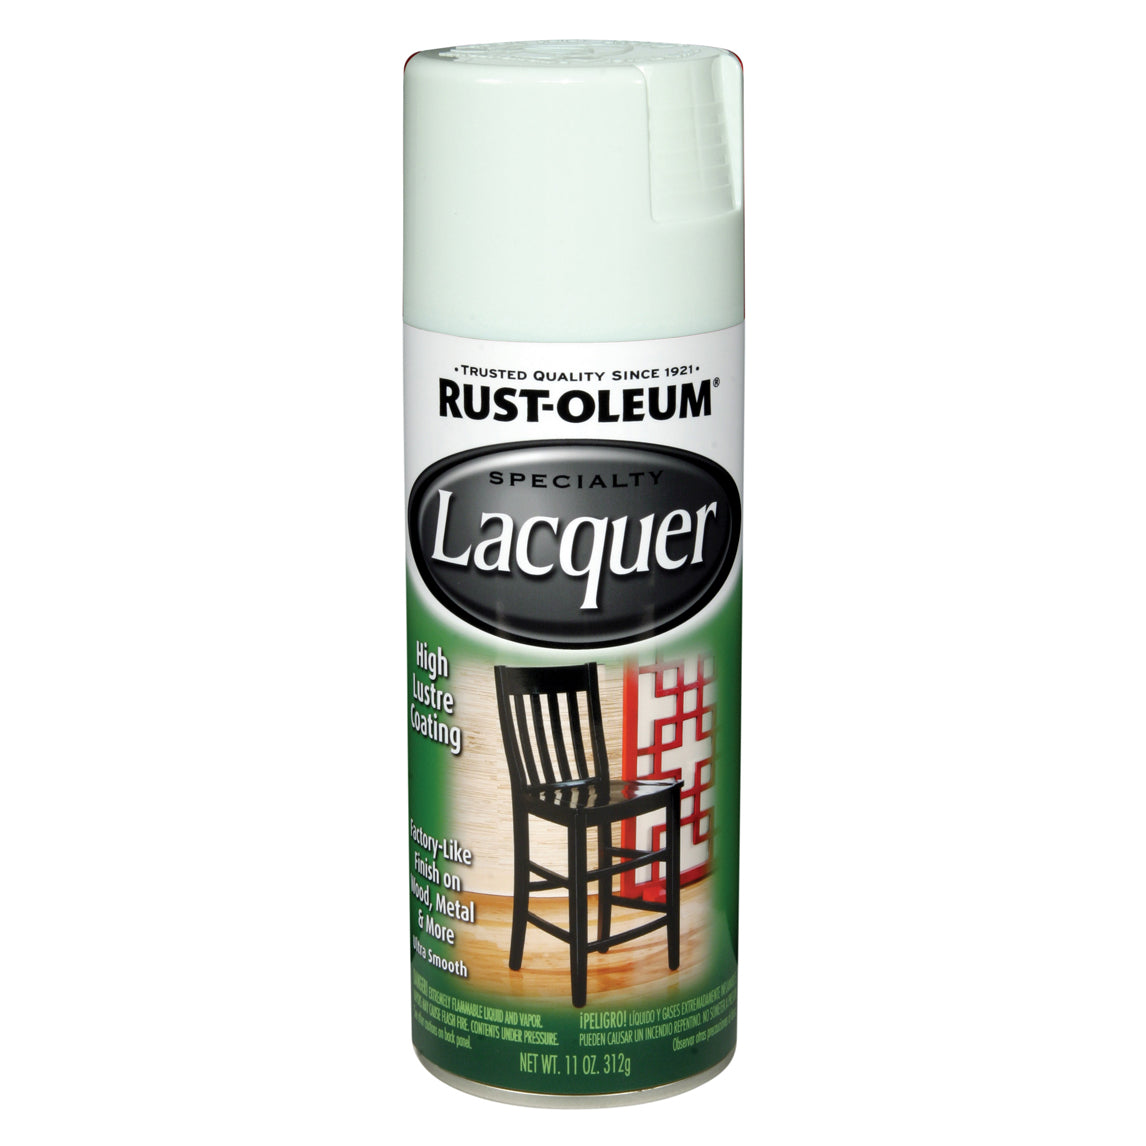 Specialty Lacquer Paint